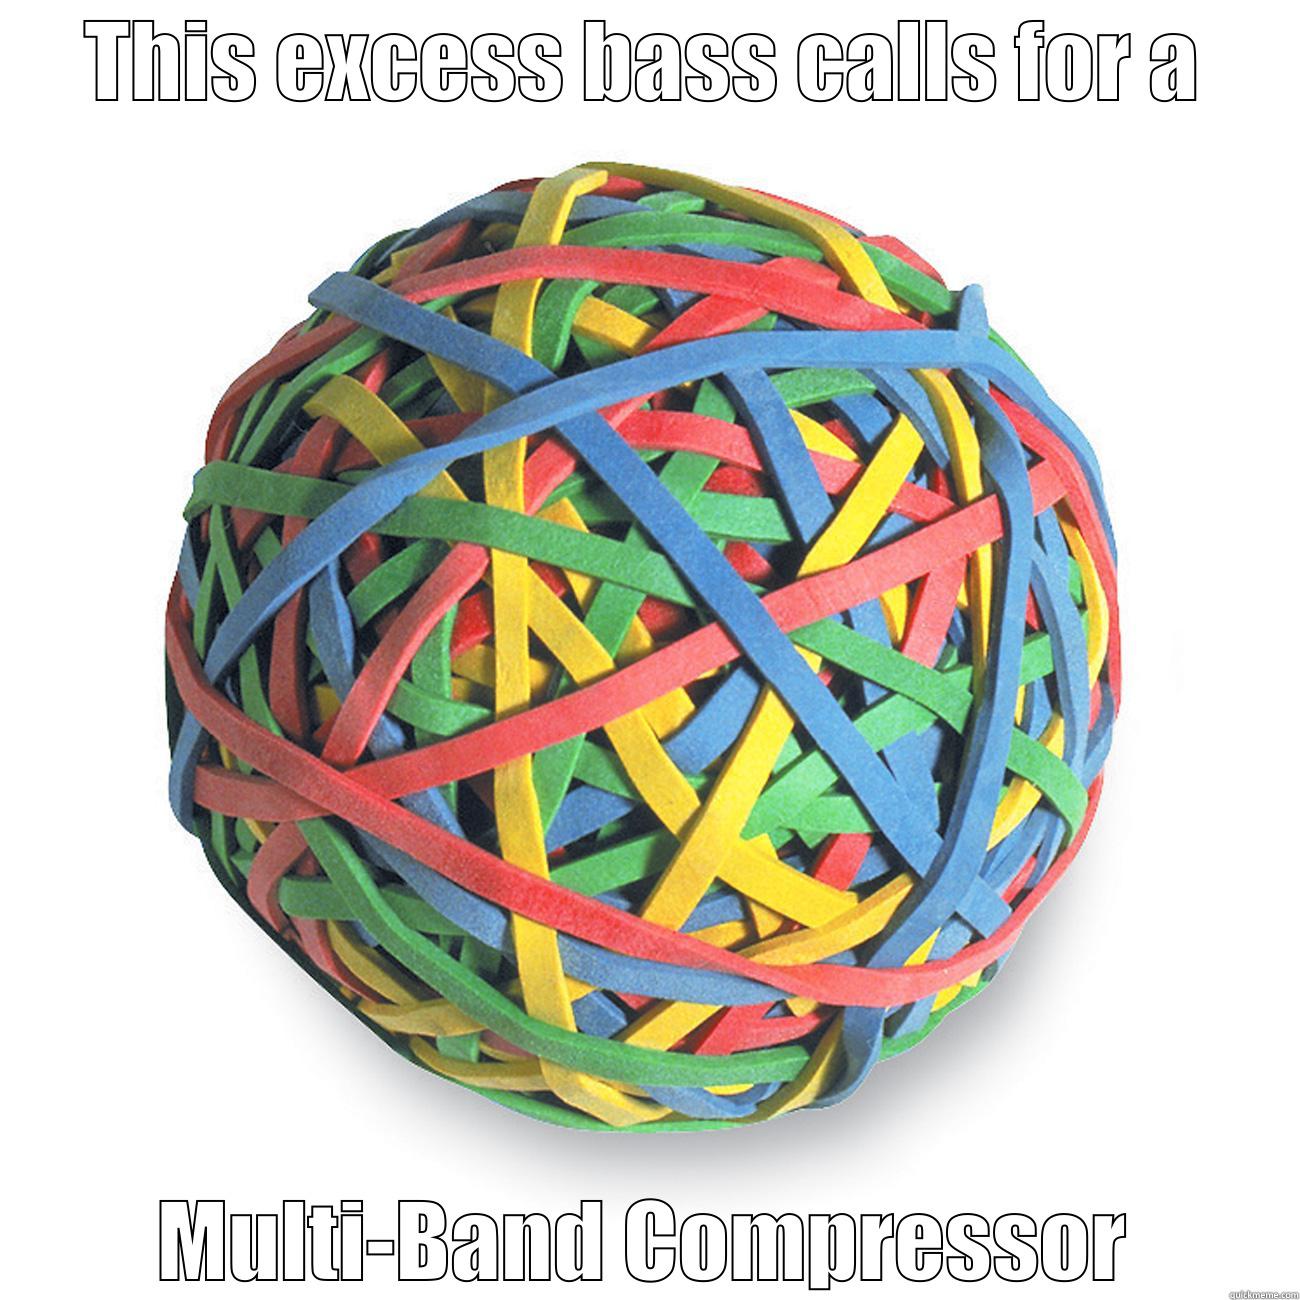 Multi-band Compressor - THIS EXCESS BASS CALLS FOR A MULTI-BAND COMPRESSOR Misc